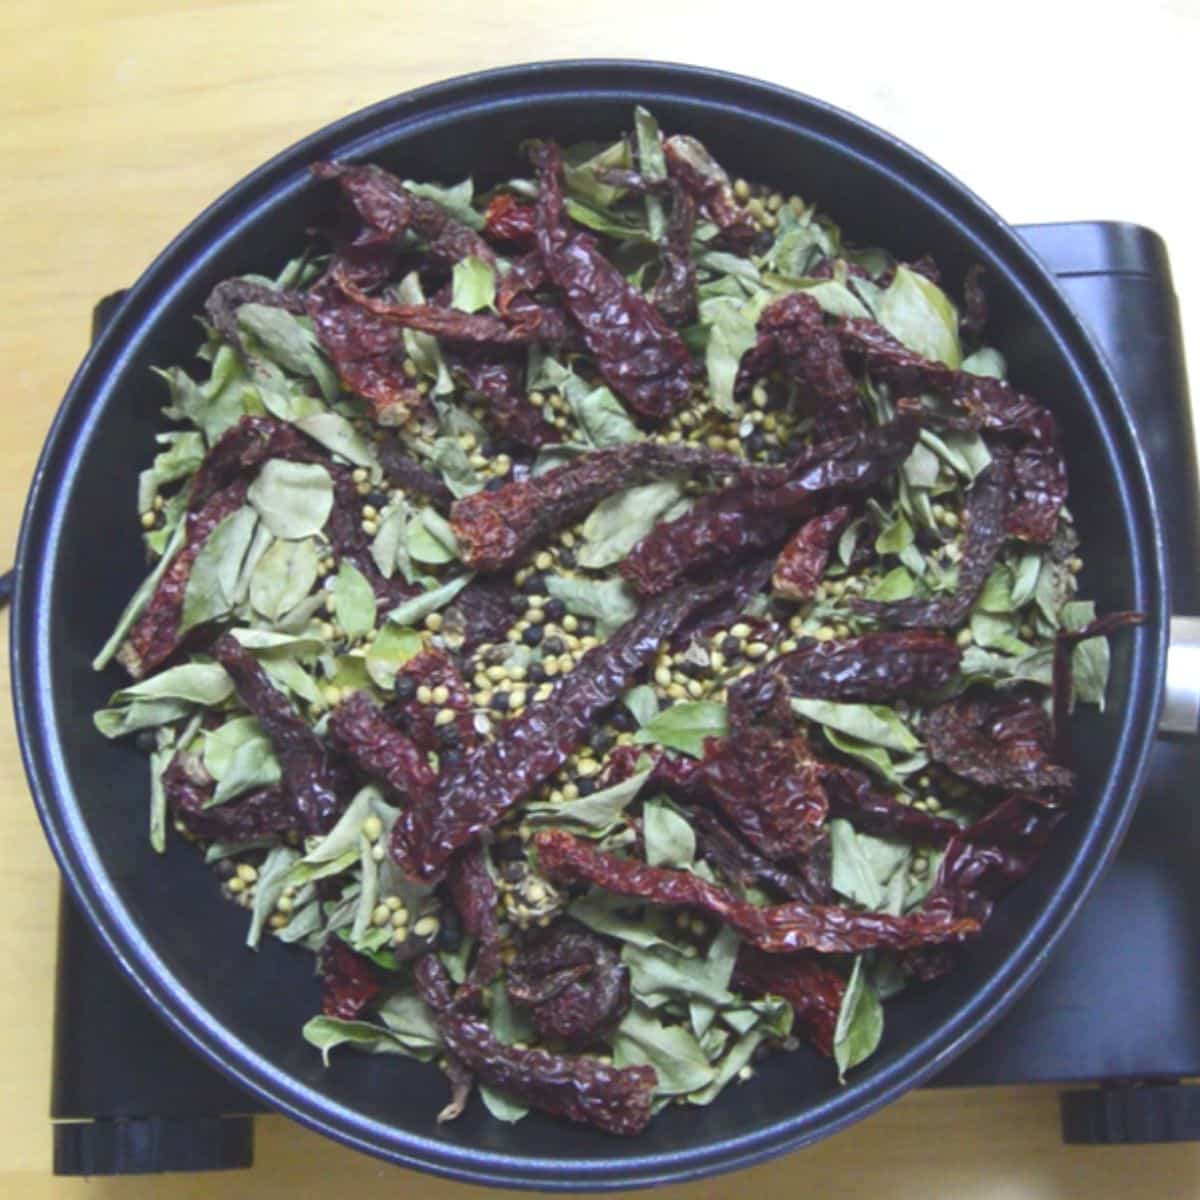 curry leaves, red chillies and whole spices in a black pan placed on a burner.